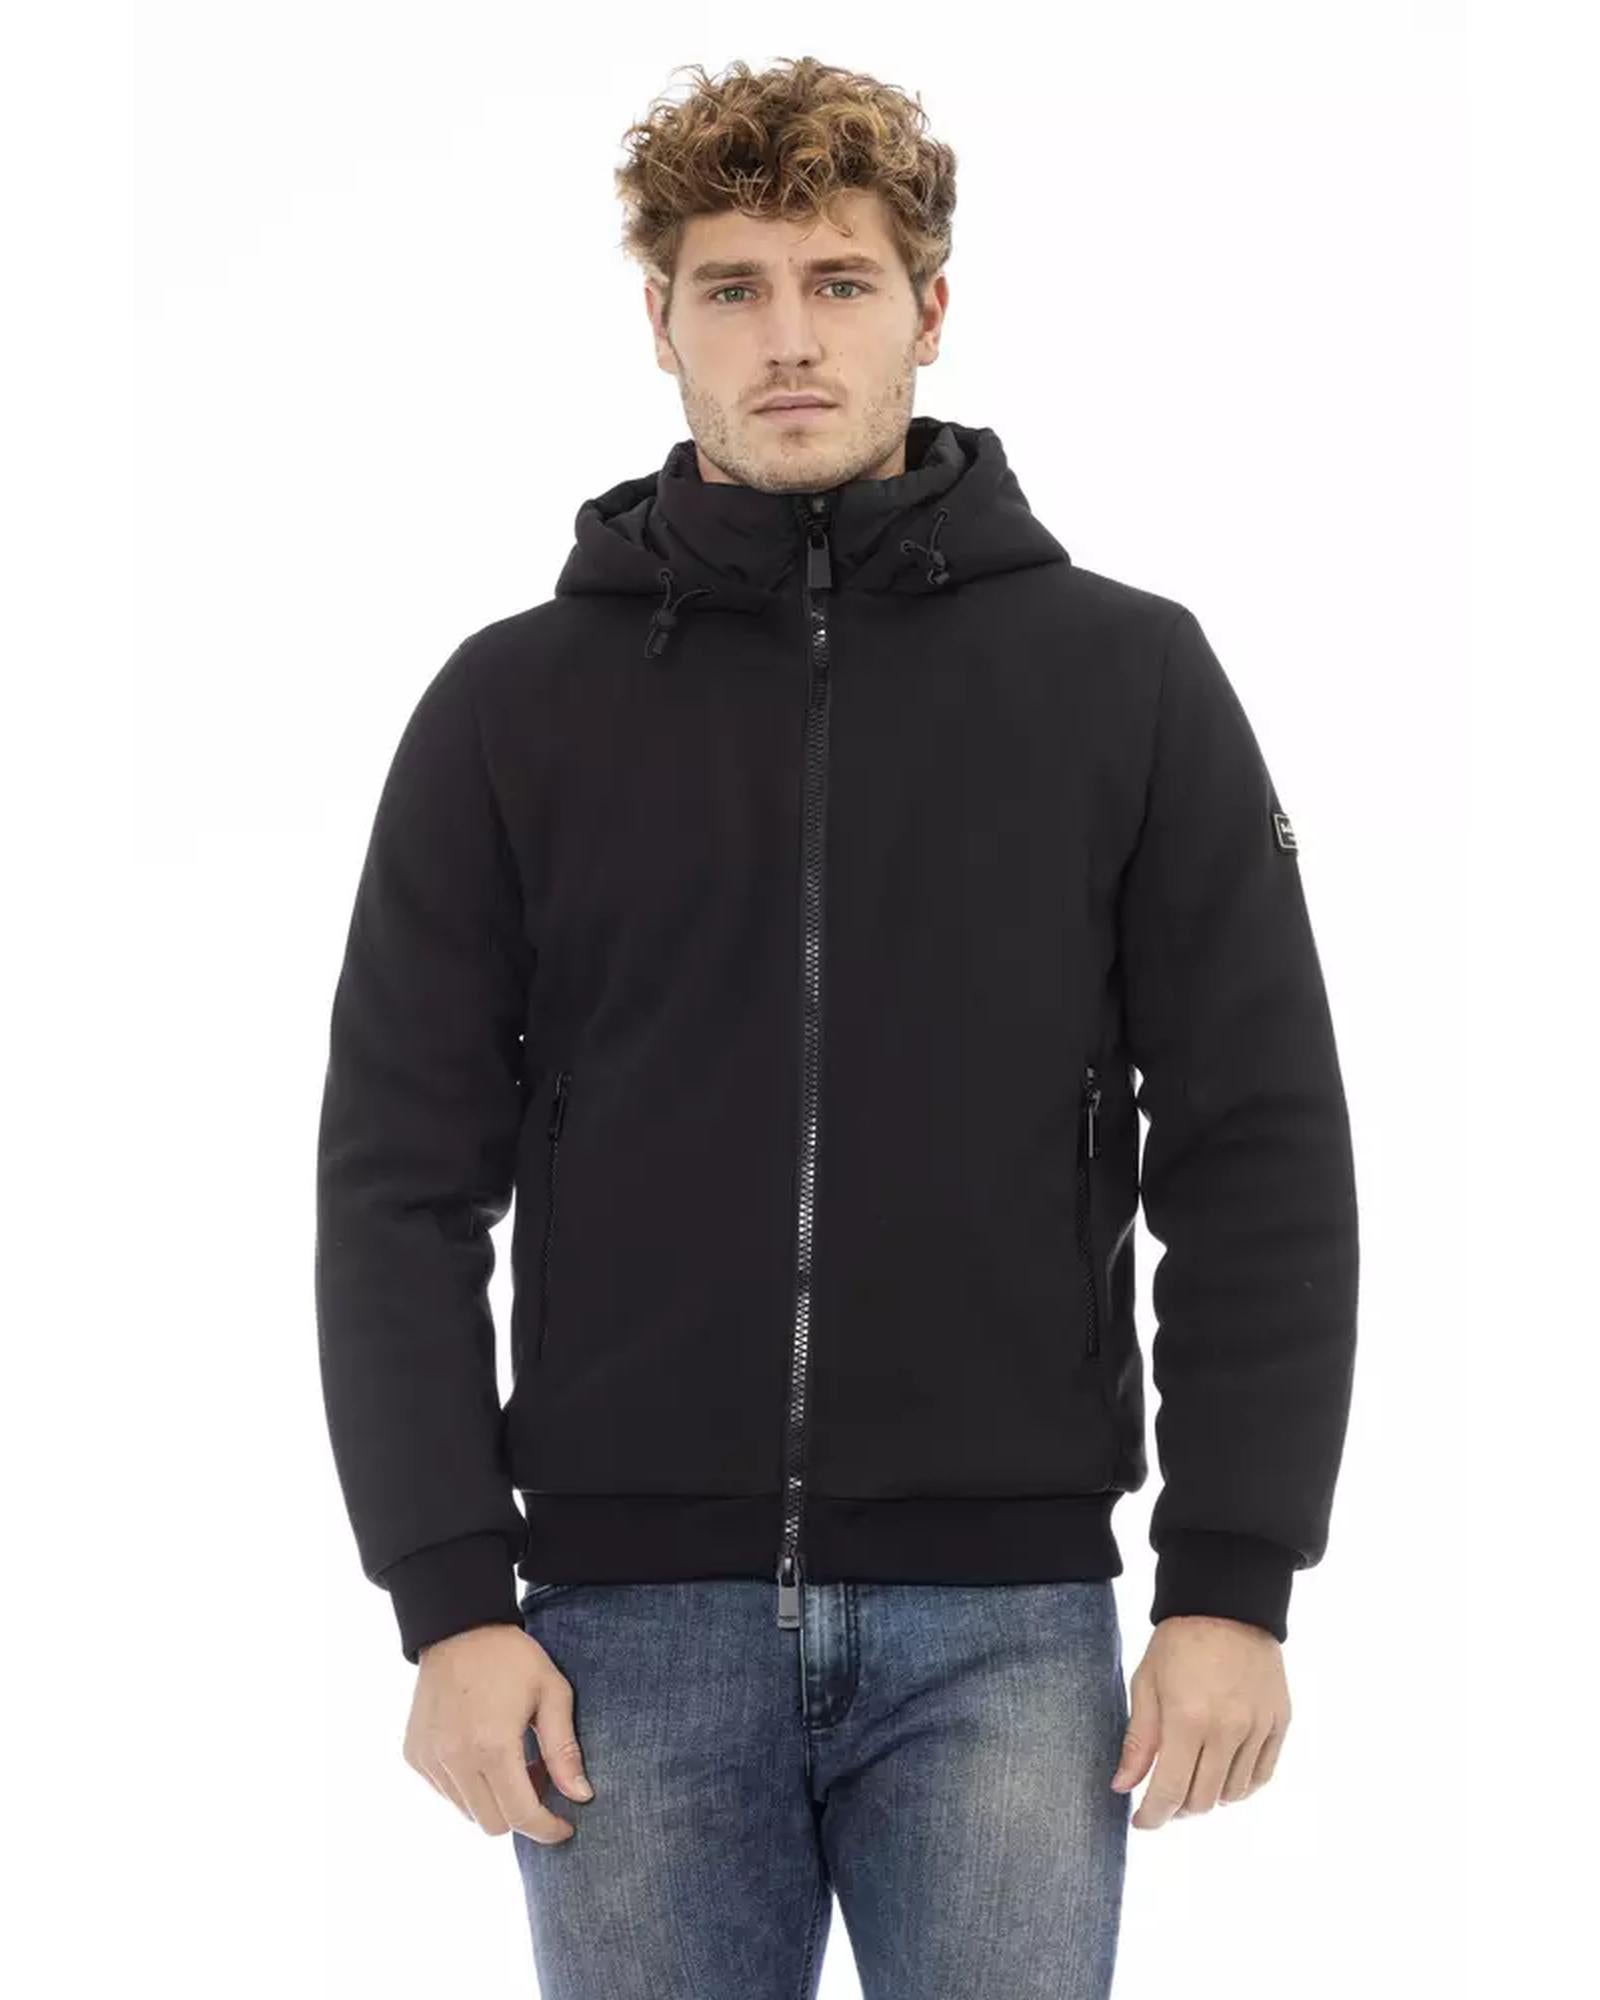 Threaded Pocket Jacket with Double Breasted Closure XL Men